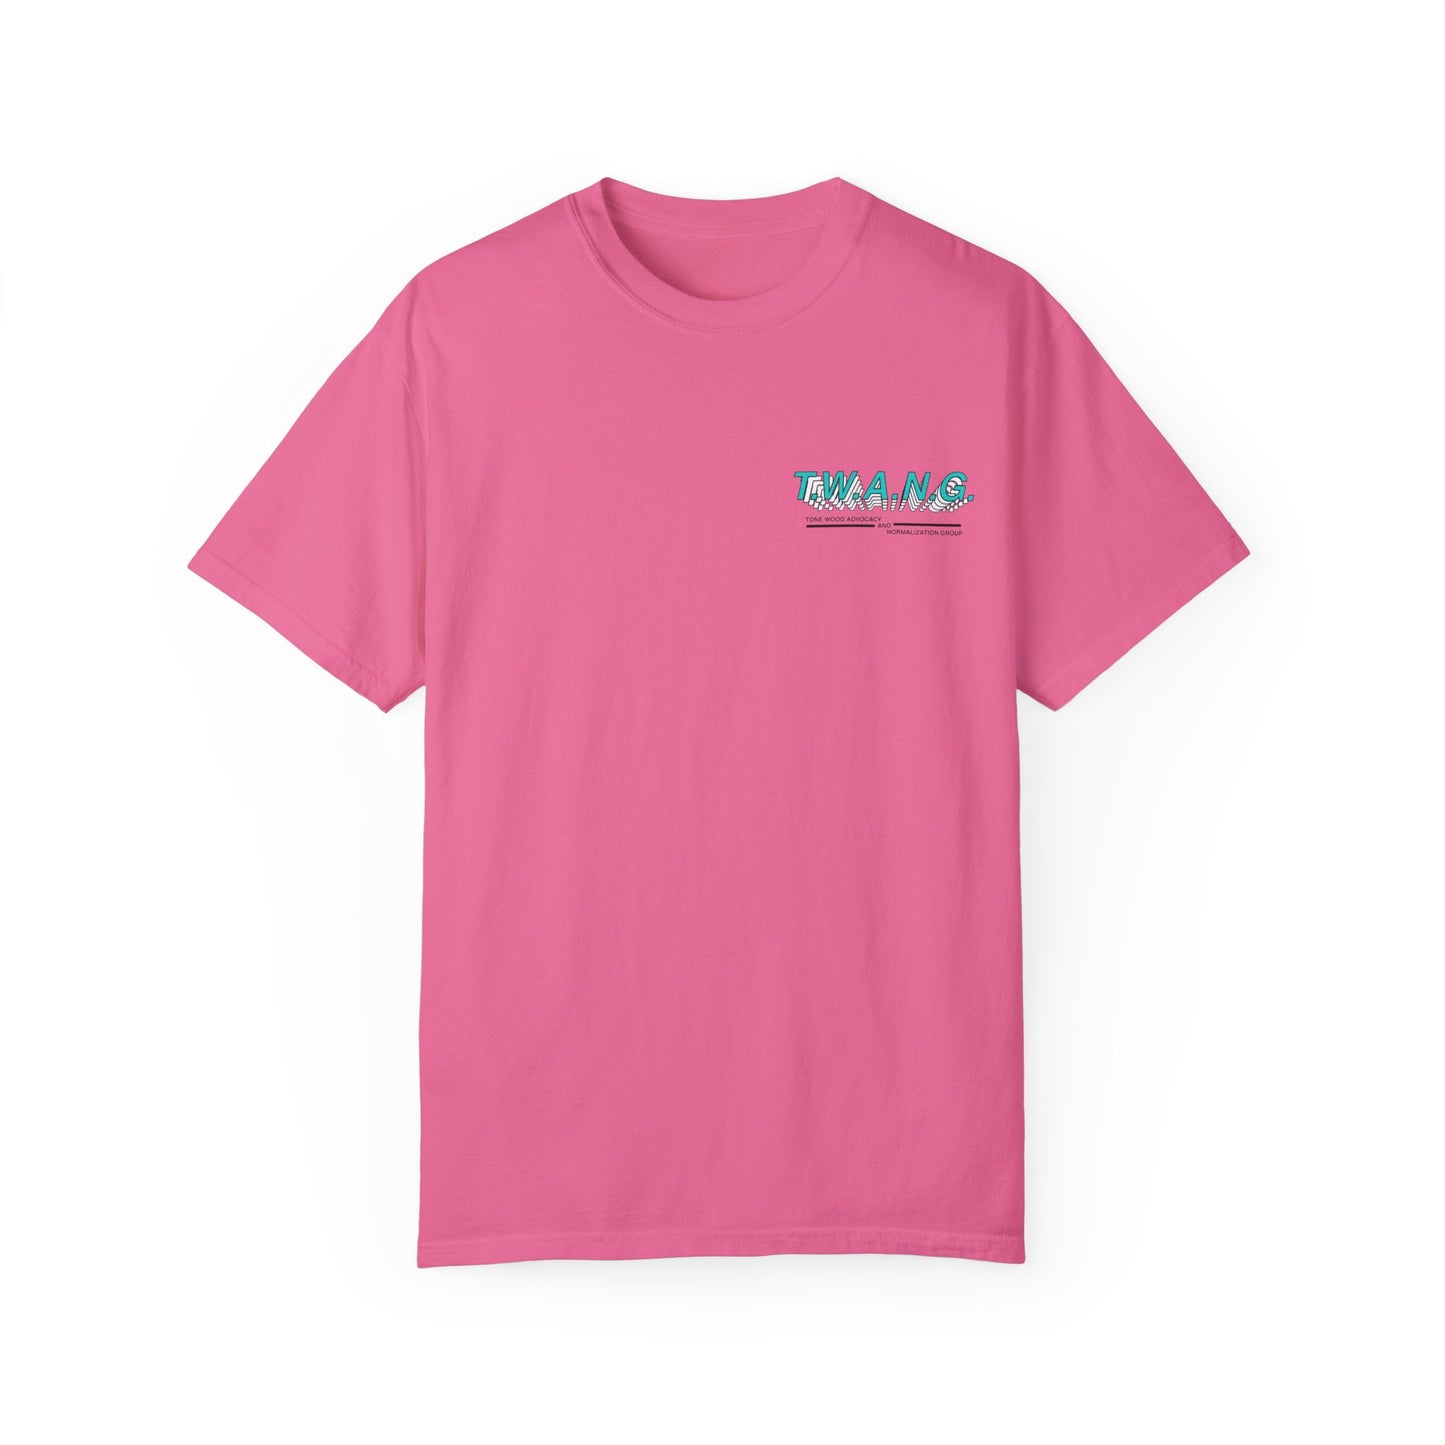 T.W.A.N.G. Mid-weight T-shirt (Unisex)